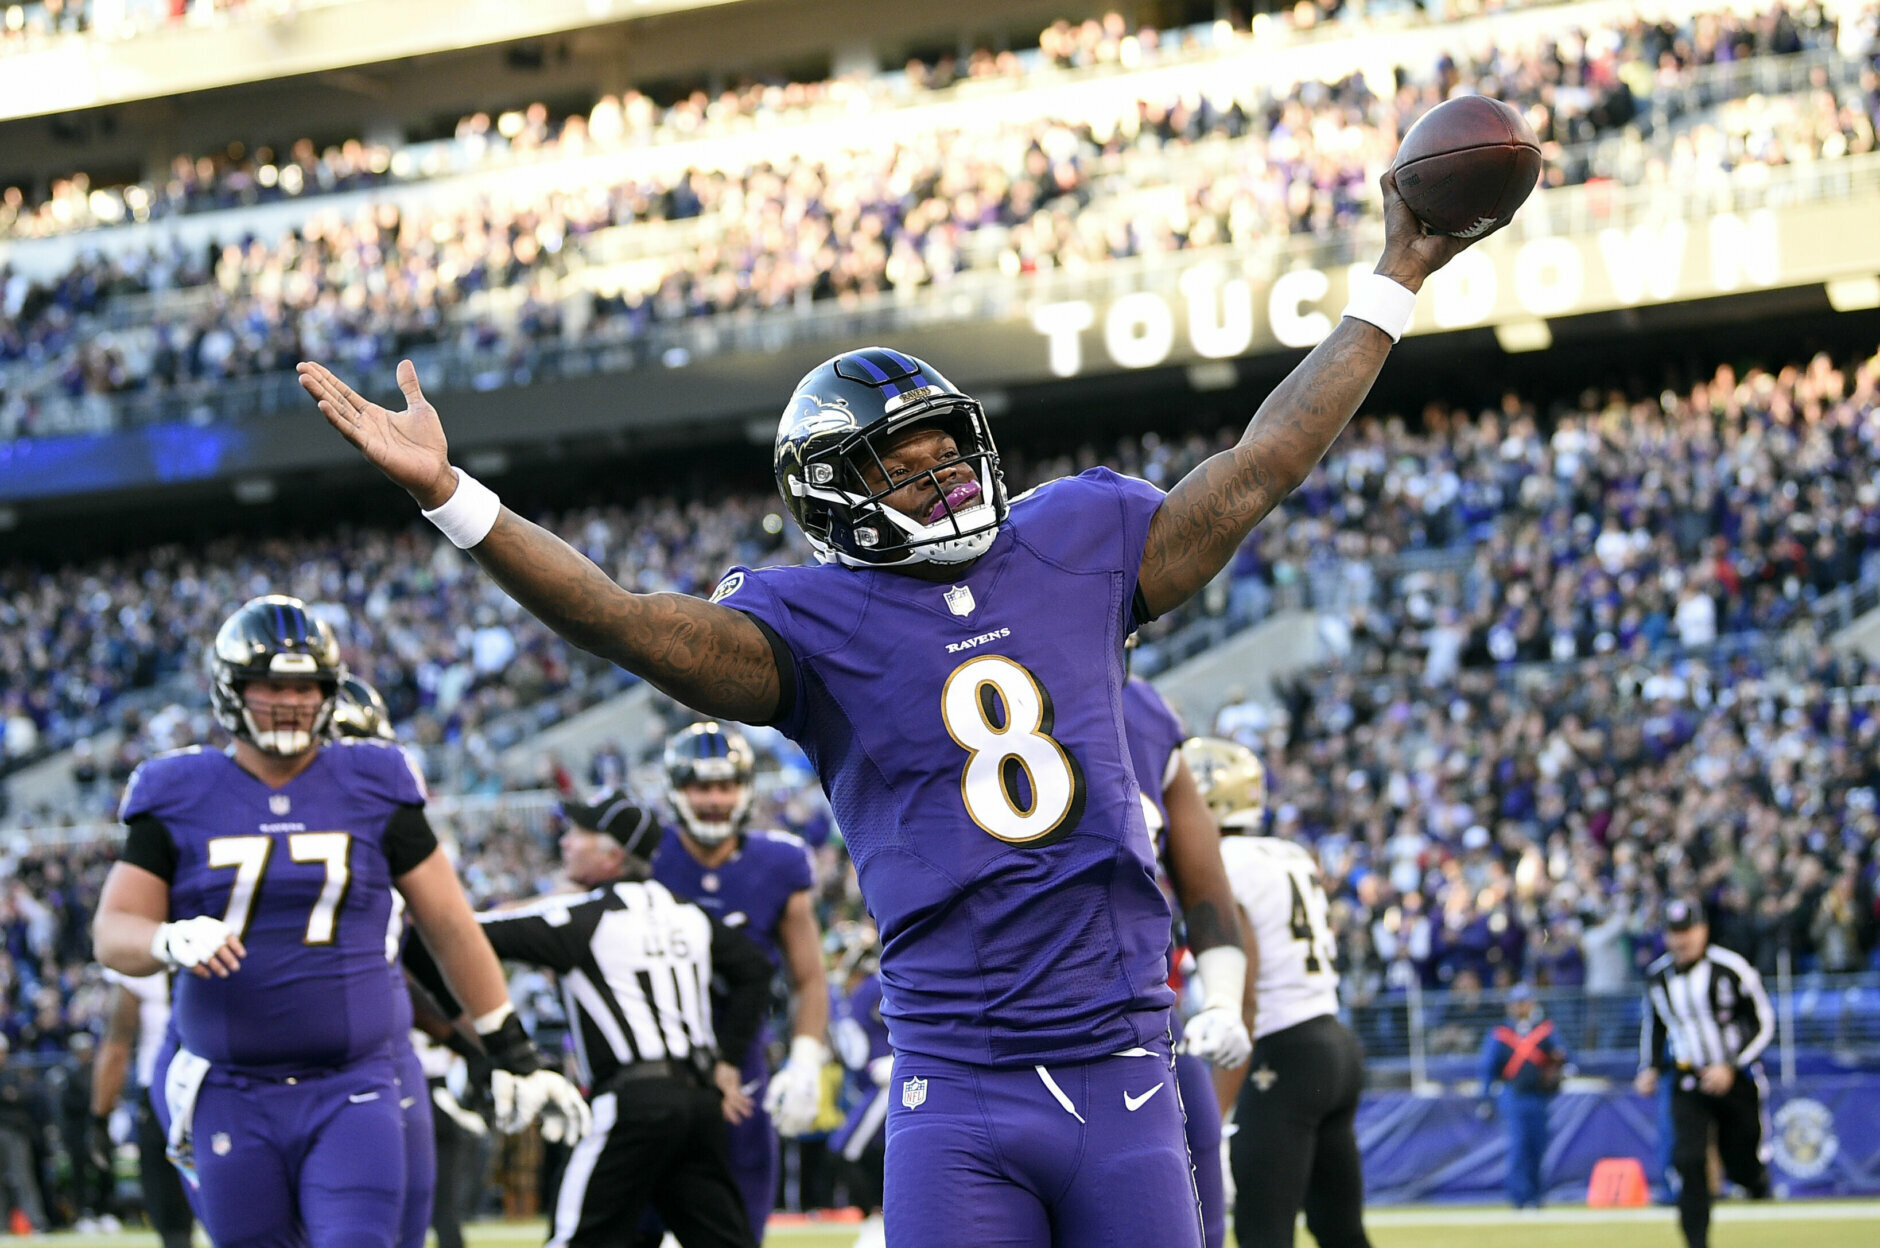 <p><strong>Super Bowl LV</strong></p>
<p>Ravens over Saints</p>
<p>Bonus prediction: Lamar Jackson directs a come-from-behind victory to win Super Bowl MVP, and Drew Brees retires after the game.</p>
